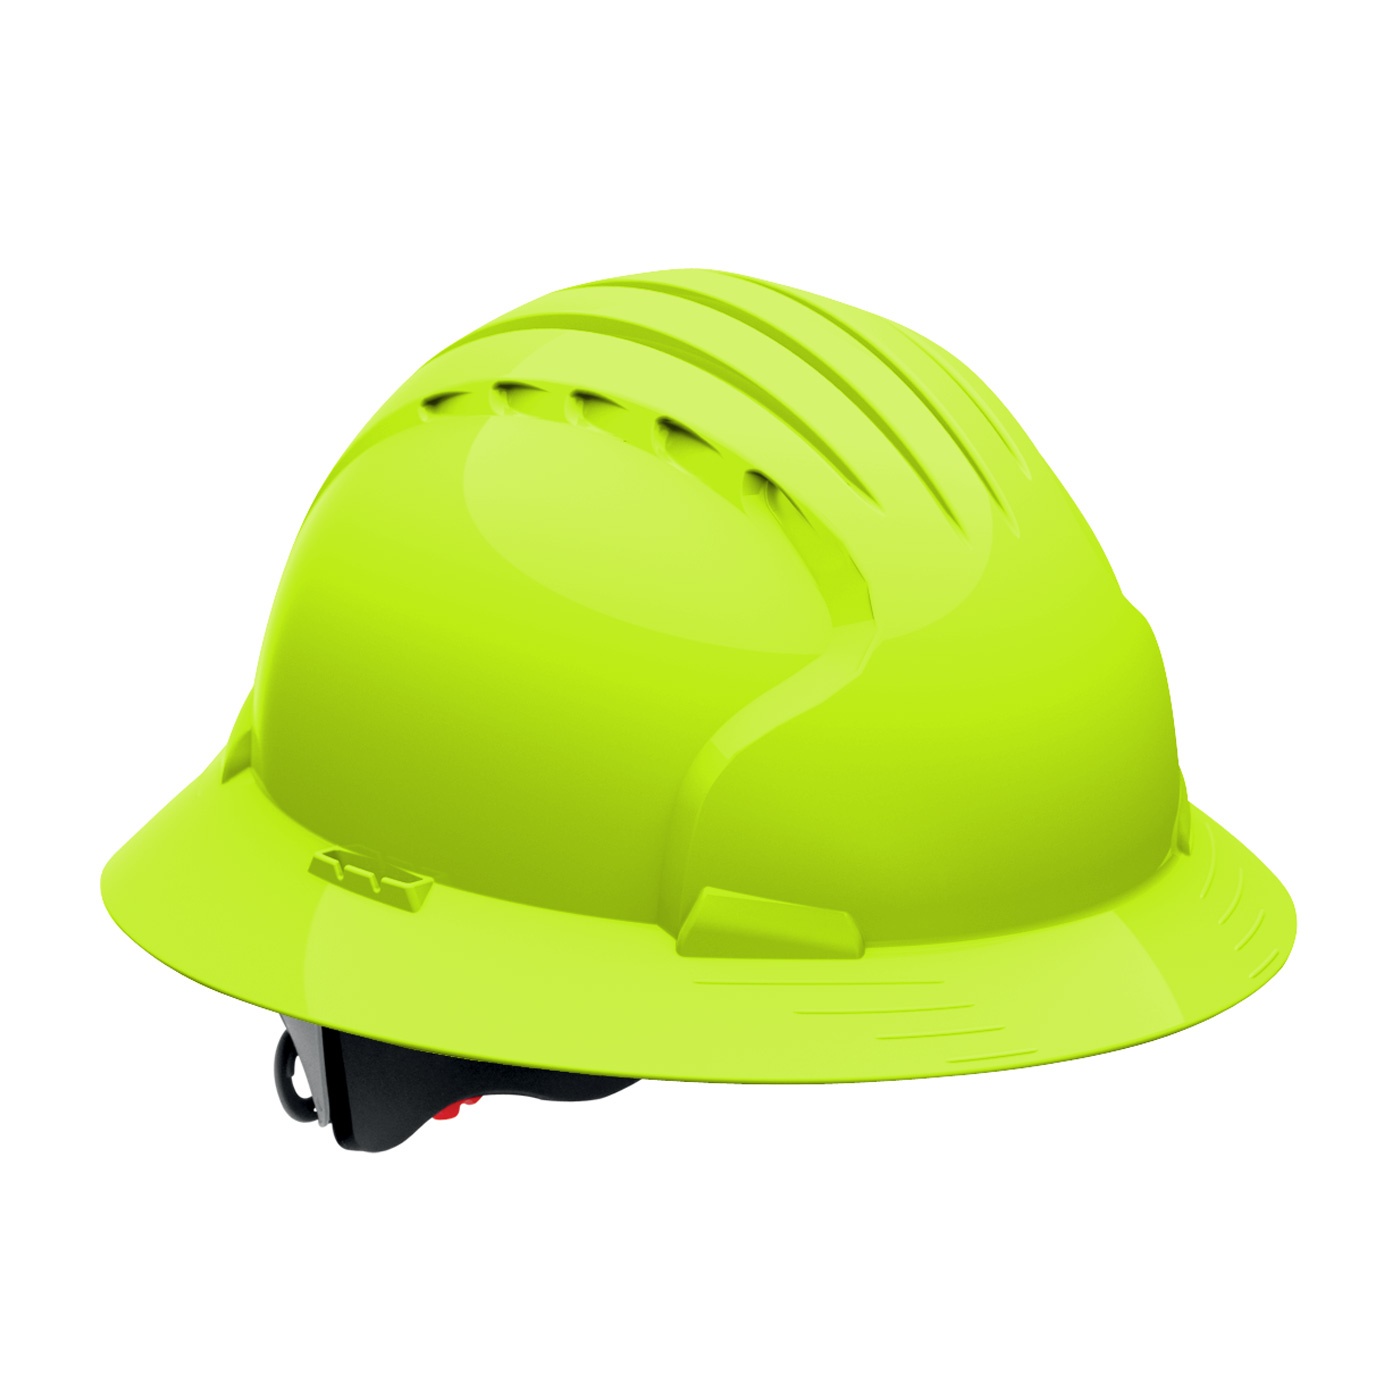 JSP 6161 Evolution Deluxe Full Brim Hard Hat from Columbia Safety